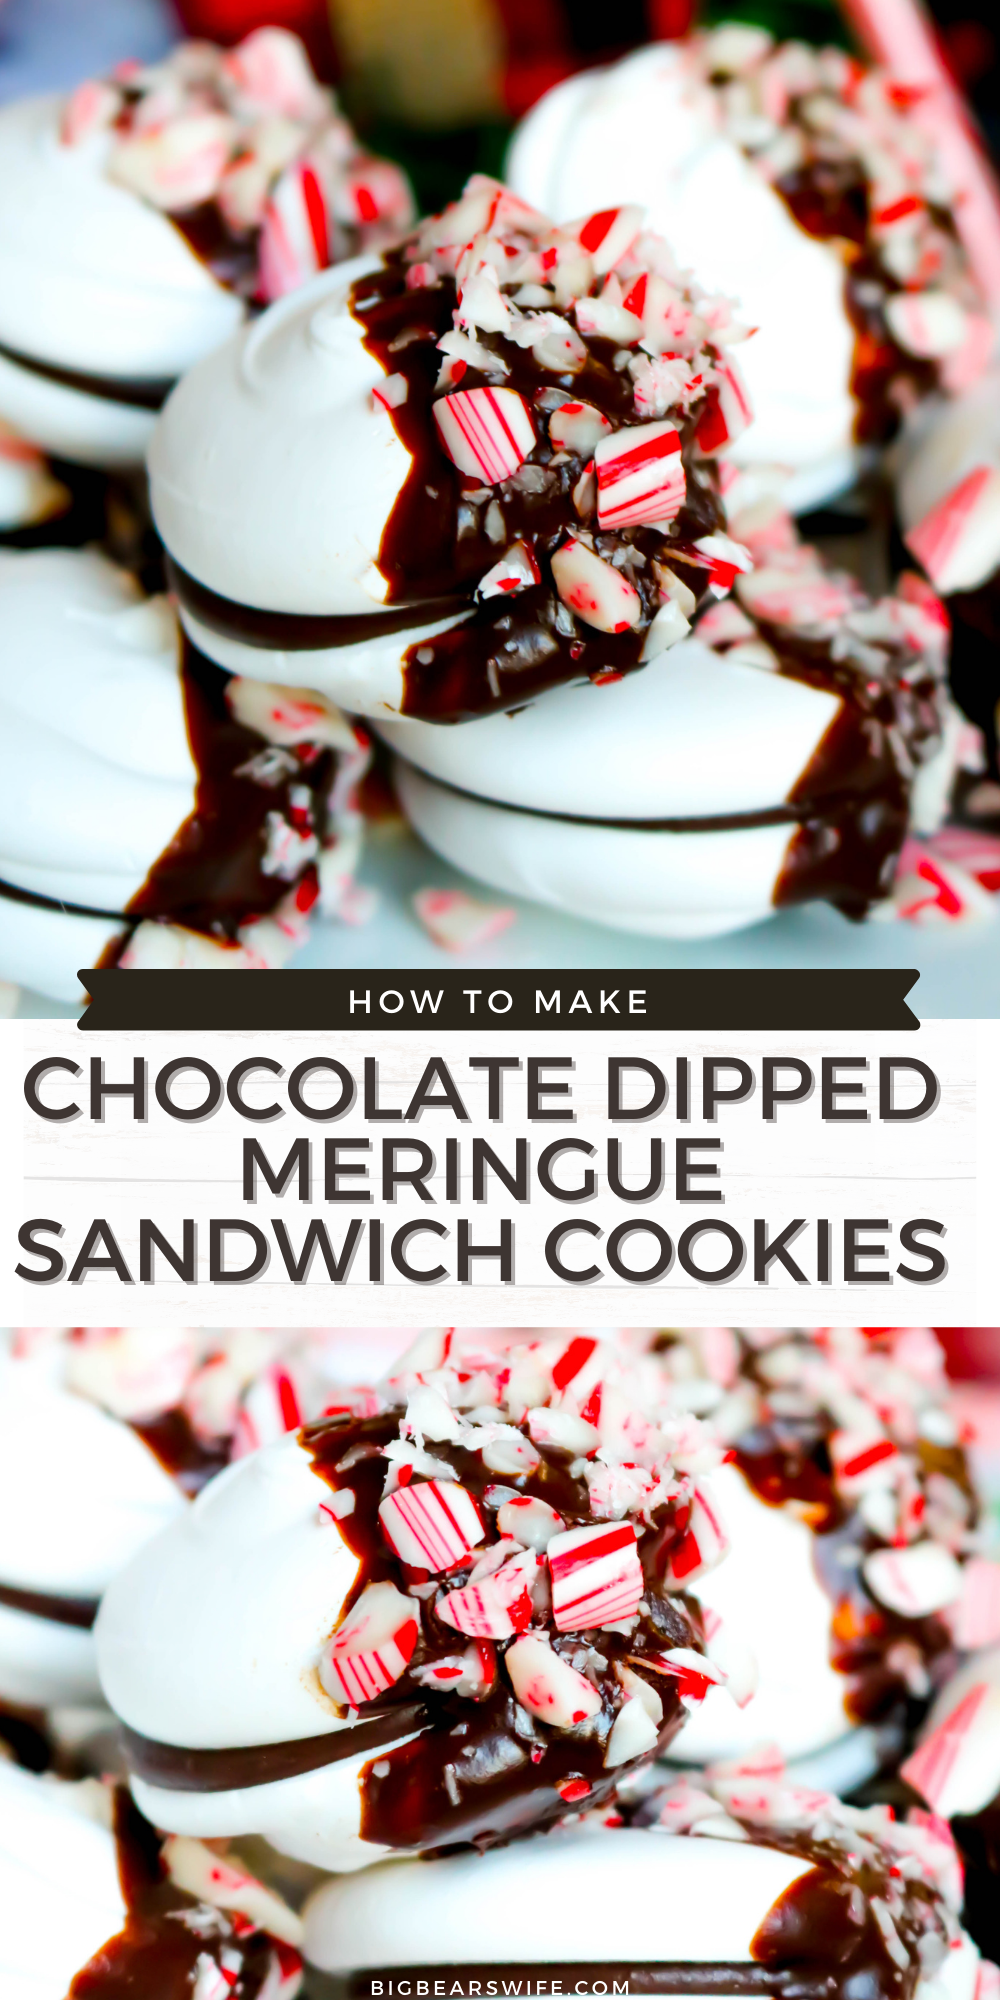 These Chocolate-Dipped Meringue Sandwich Cookies are just right for a holiday gathering and great to give as a homemade gift from the kitchen. Easy meringue sandwich cookies are filled with a chocolate ganache, dipped in chocolate and sprinkled with crushed candy canes for the ideal festive treat! via @bigbearswife